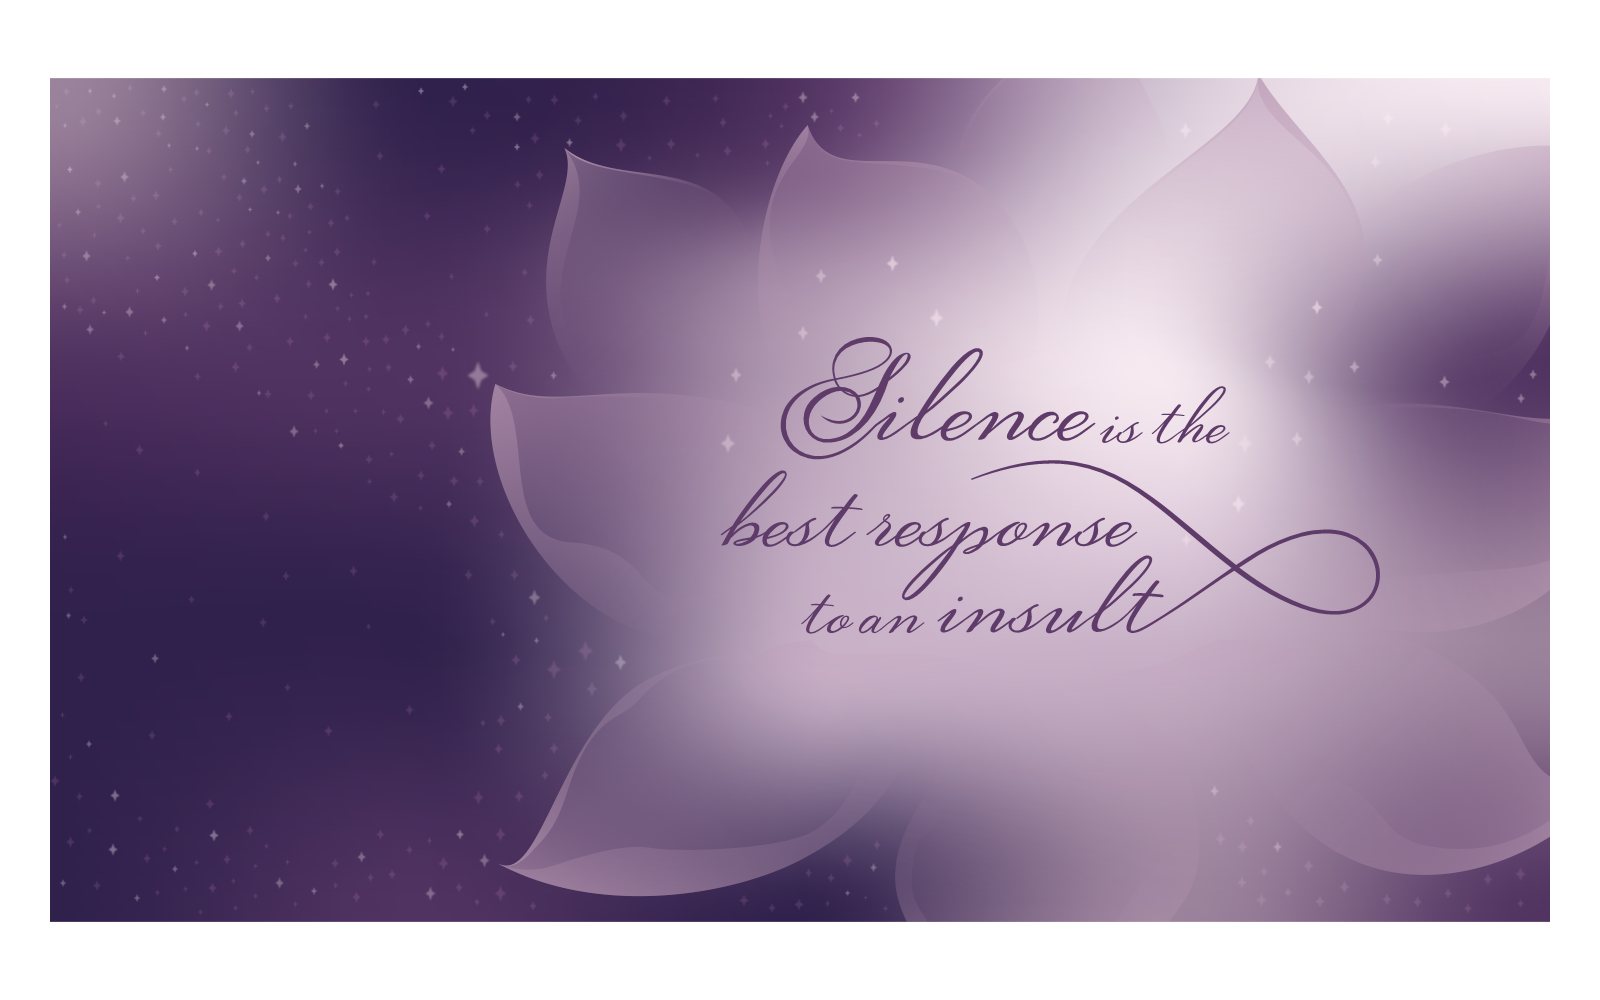 Starry Inspirational Background Image 14400x8100px with Message of Response to an Insult